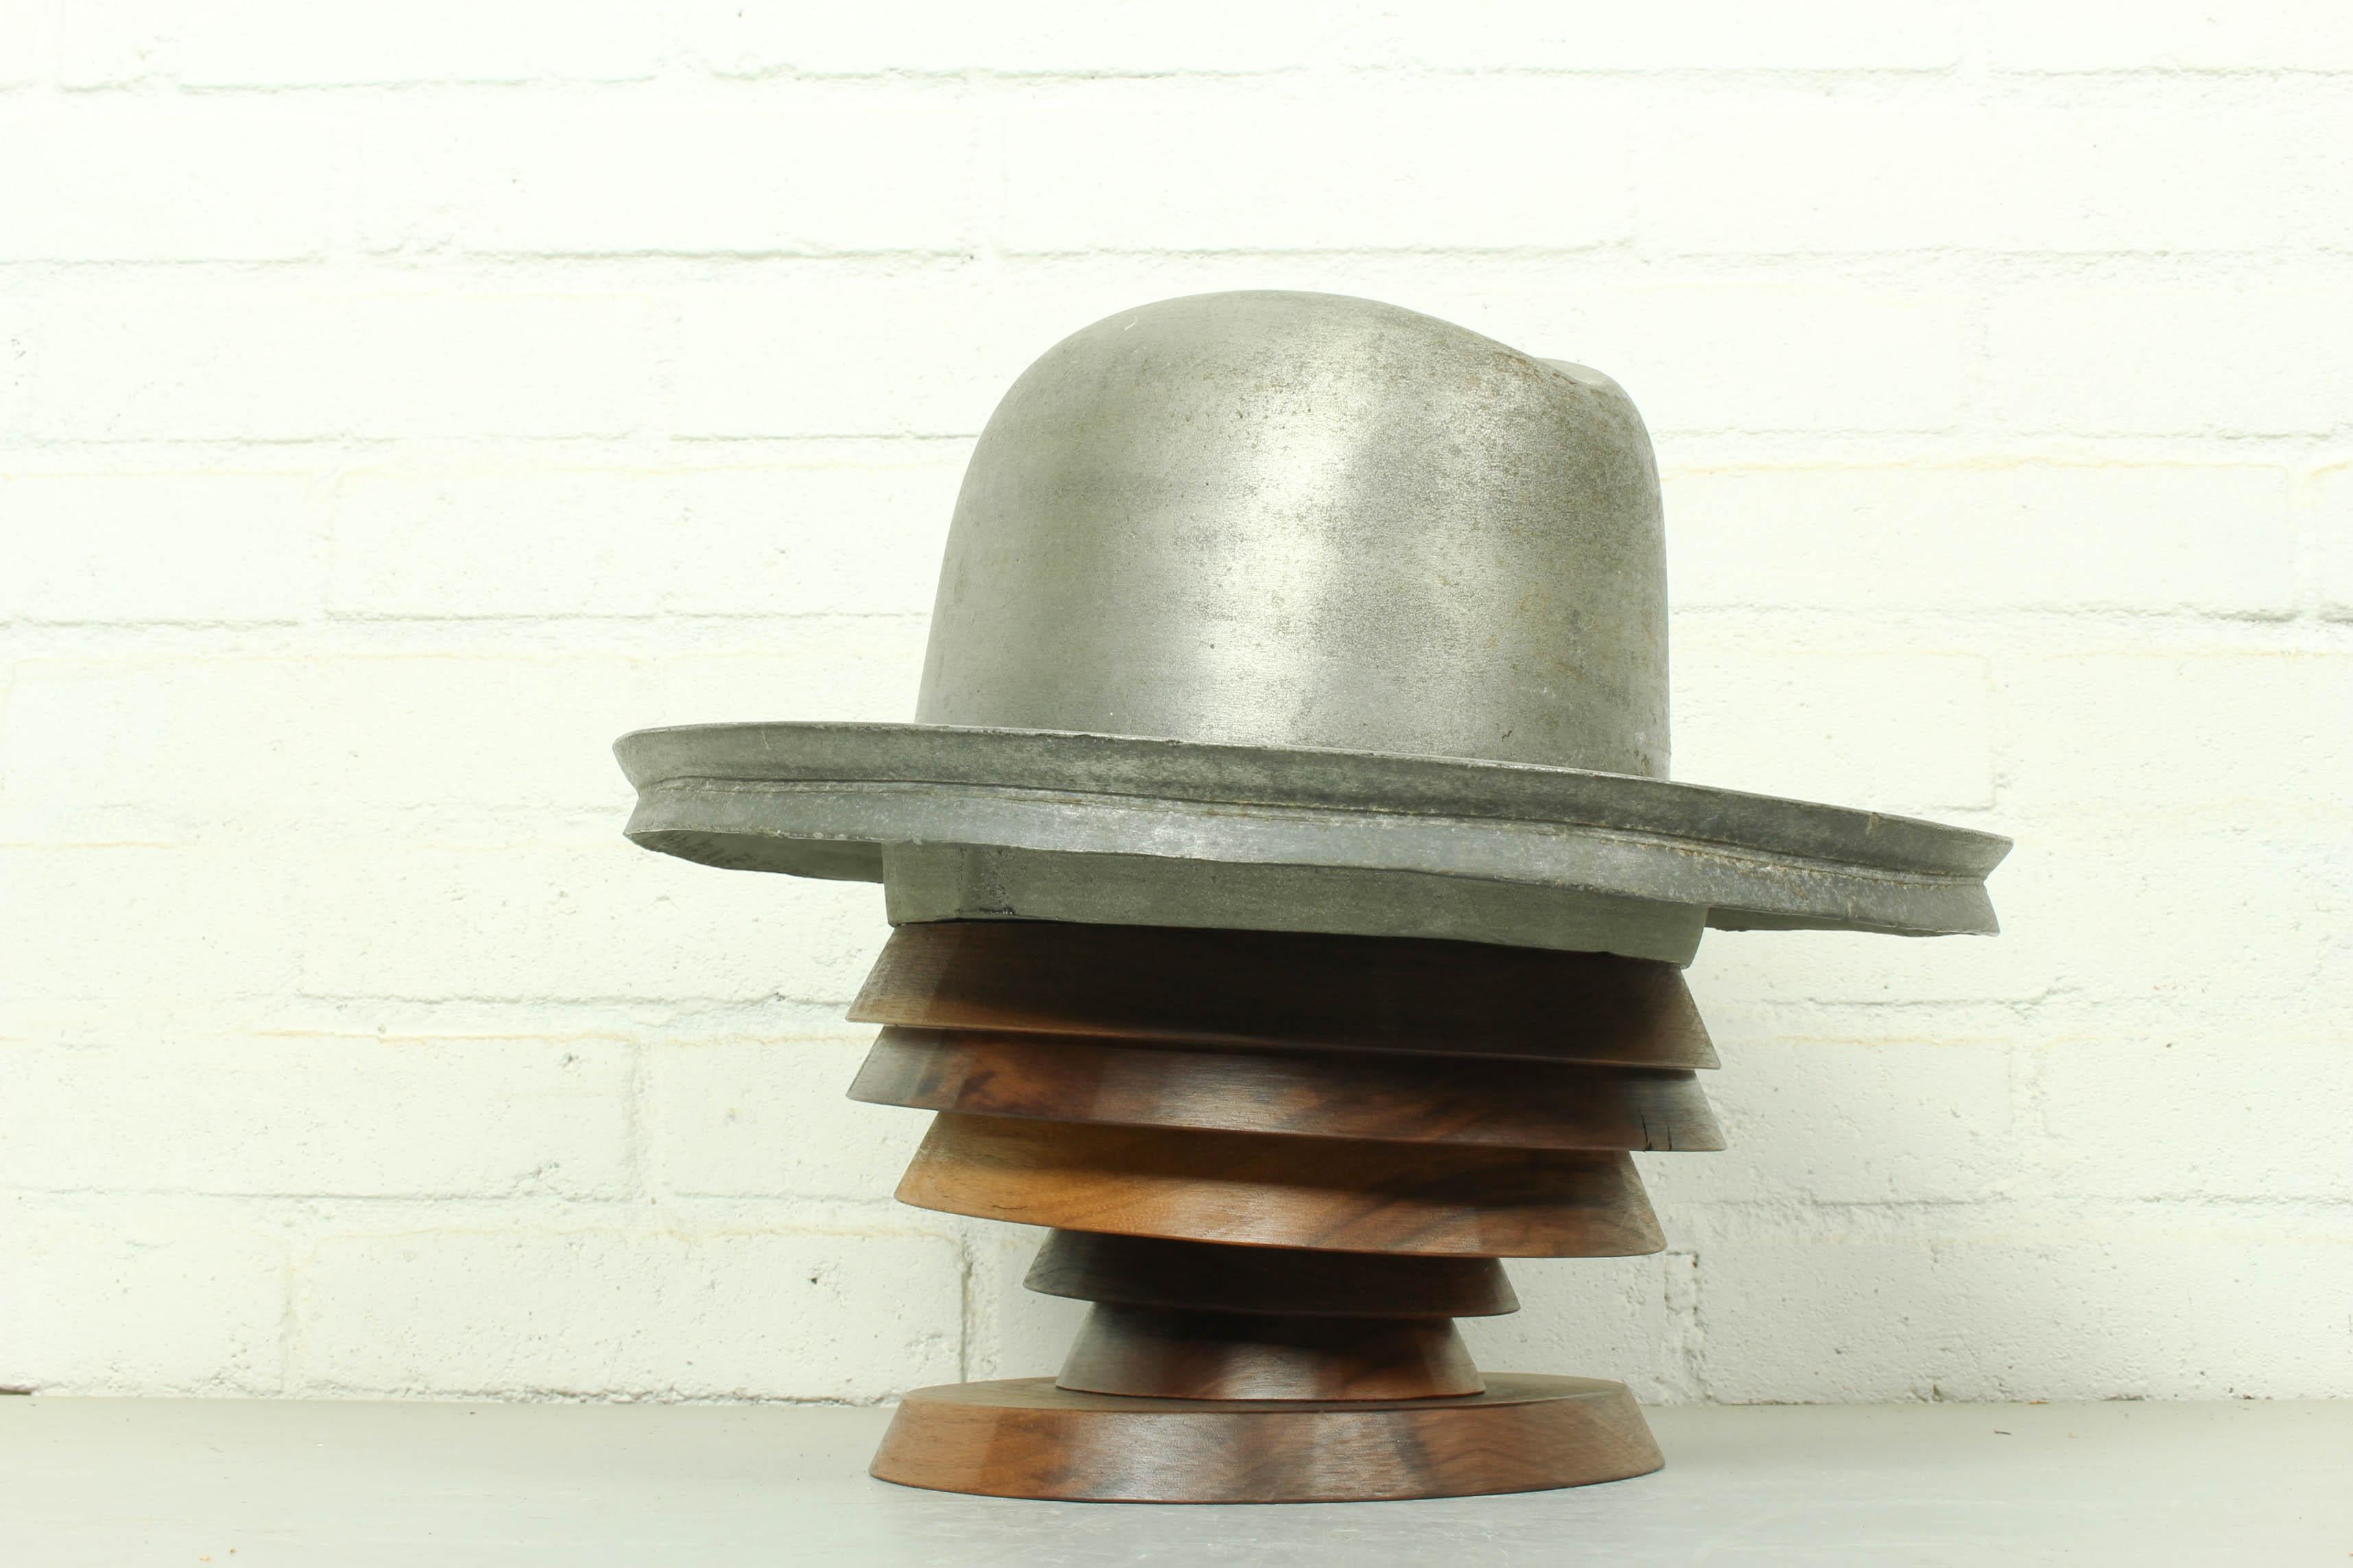 Vintage aluminum hat block mold form, circa mid-20th century. With new American nut stand.